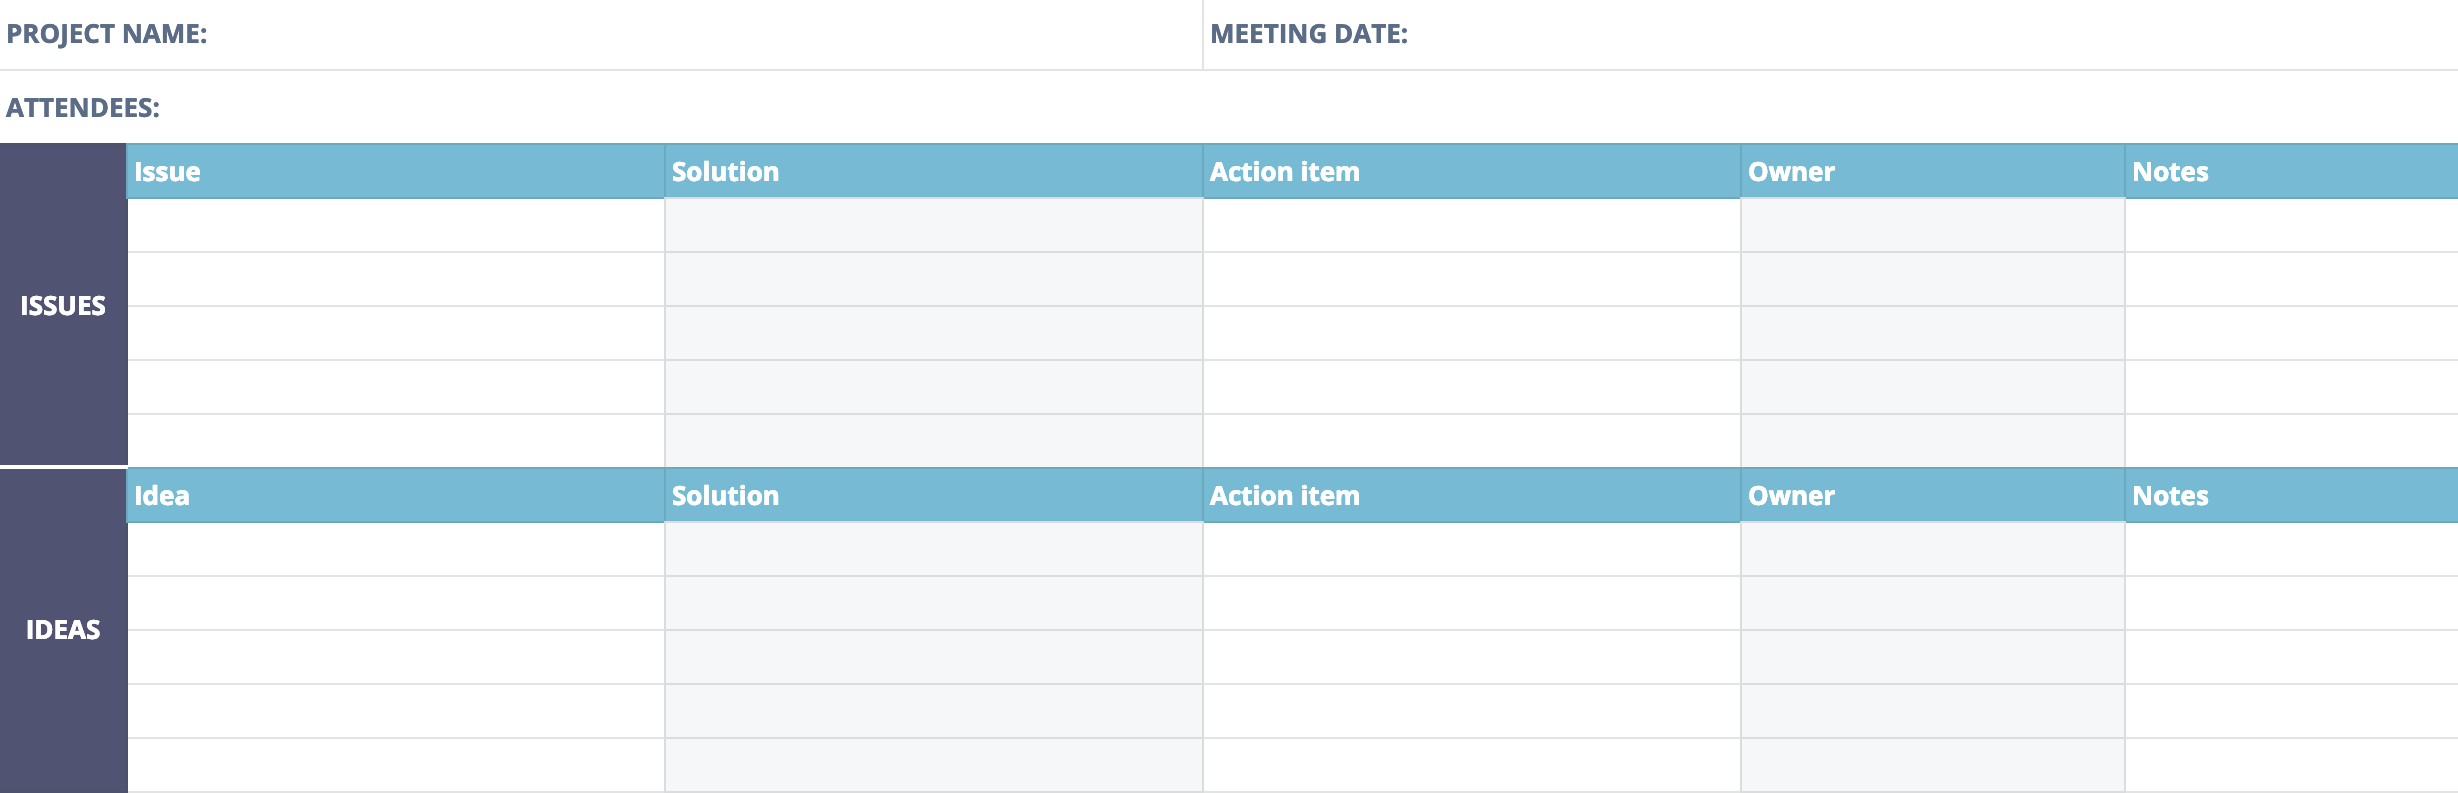 Post Mortem Meeting Template And Tips | Teamgantt Regarding Post Project Report Template